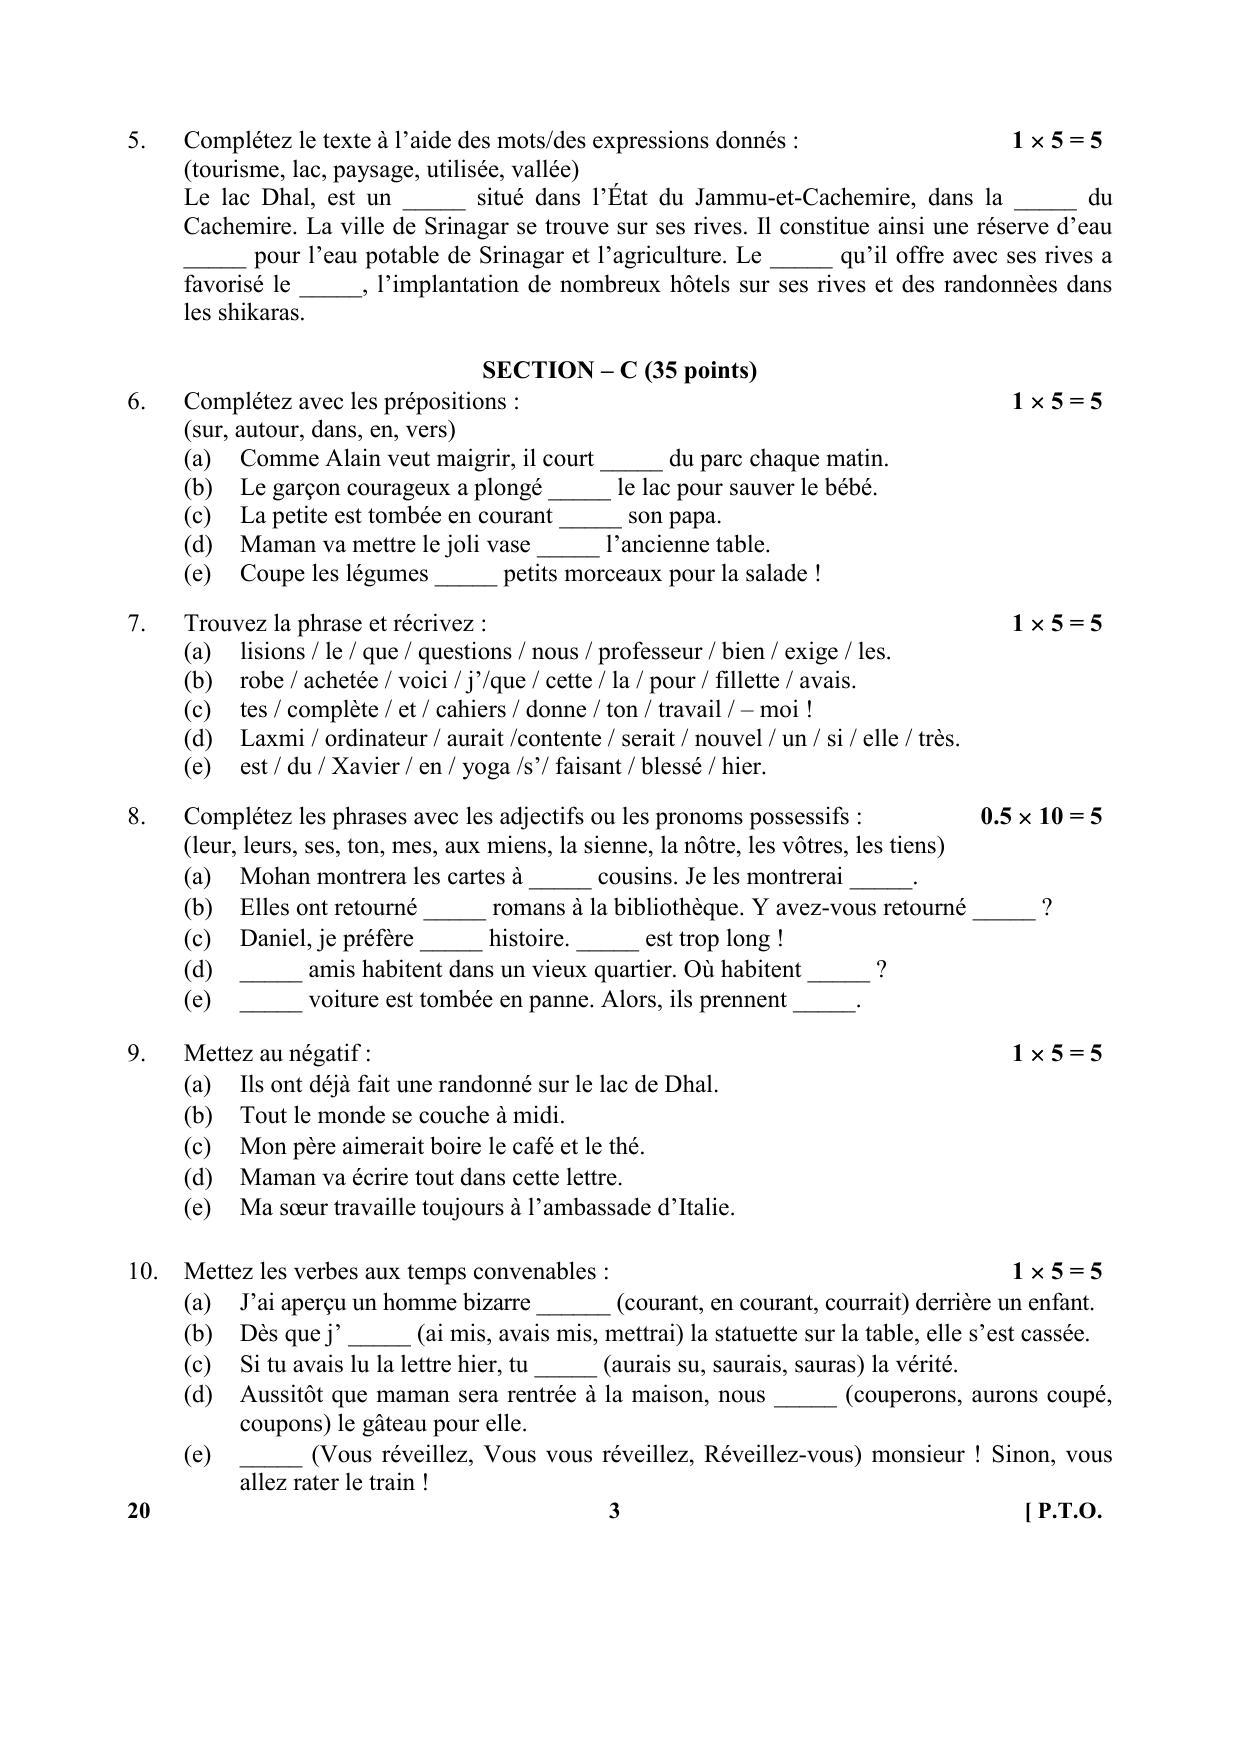 CBSE Class 10 20-French 2017-comptt Question Paper - Page 3